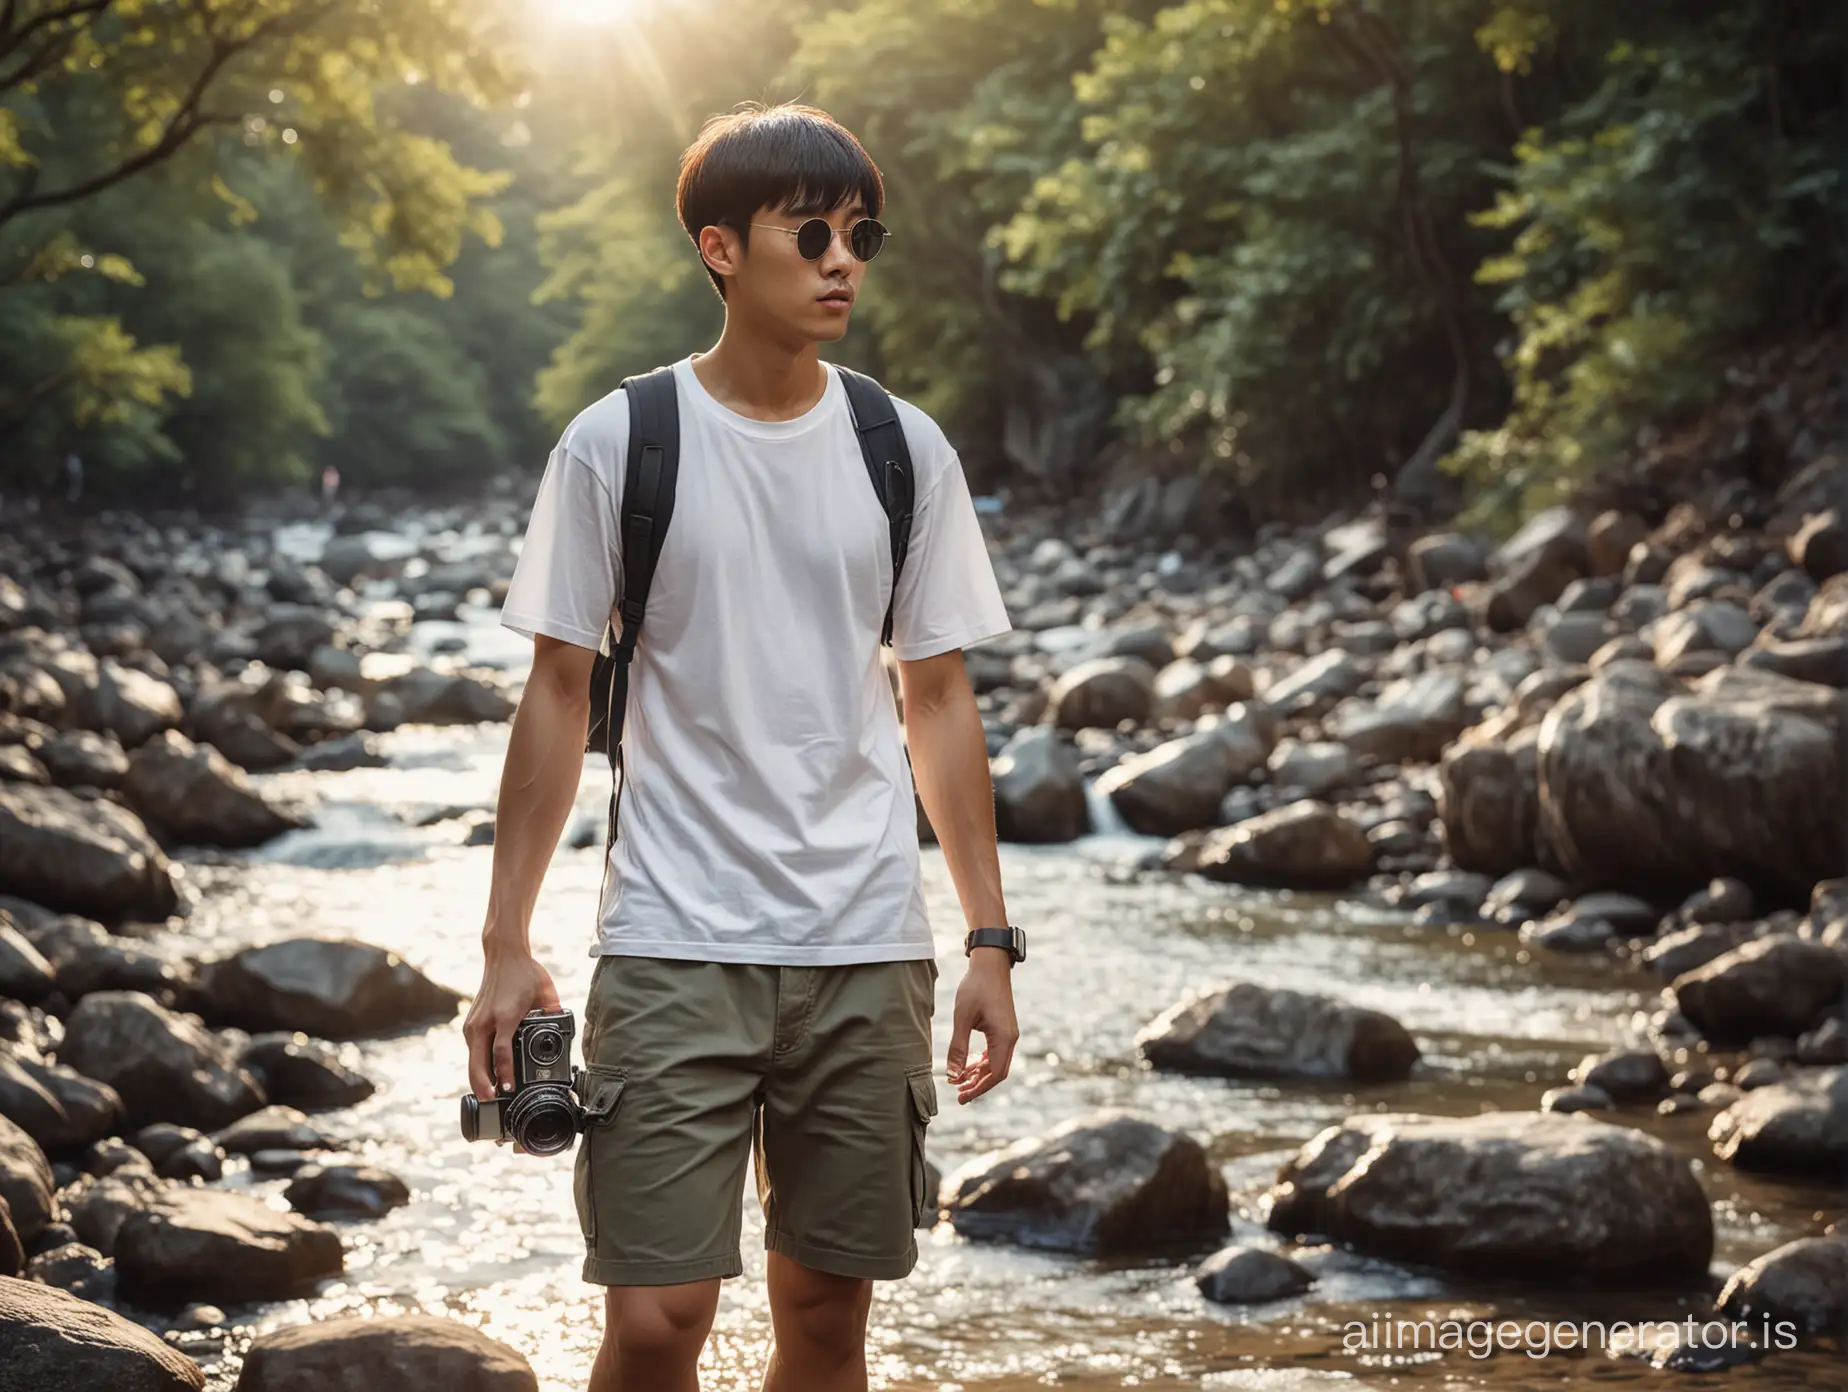 dynamic portrait, long shot, an Korean man with bowl cut hair. wearing white t-shirt , wearing sunglasses, standing barefoot, carrying a retro Camera and backpack, daydreaming on rocks with a small river flowing clear, bokeh background with a natural waterfall, refracted sunlight behind him at dusk, cinematic images, professional photography, dynamic lighting, faces looking at the camera